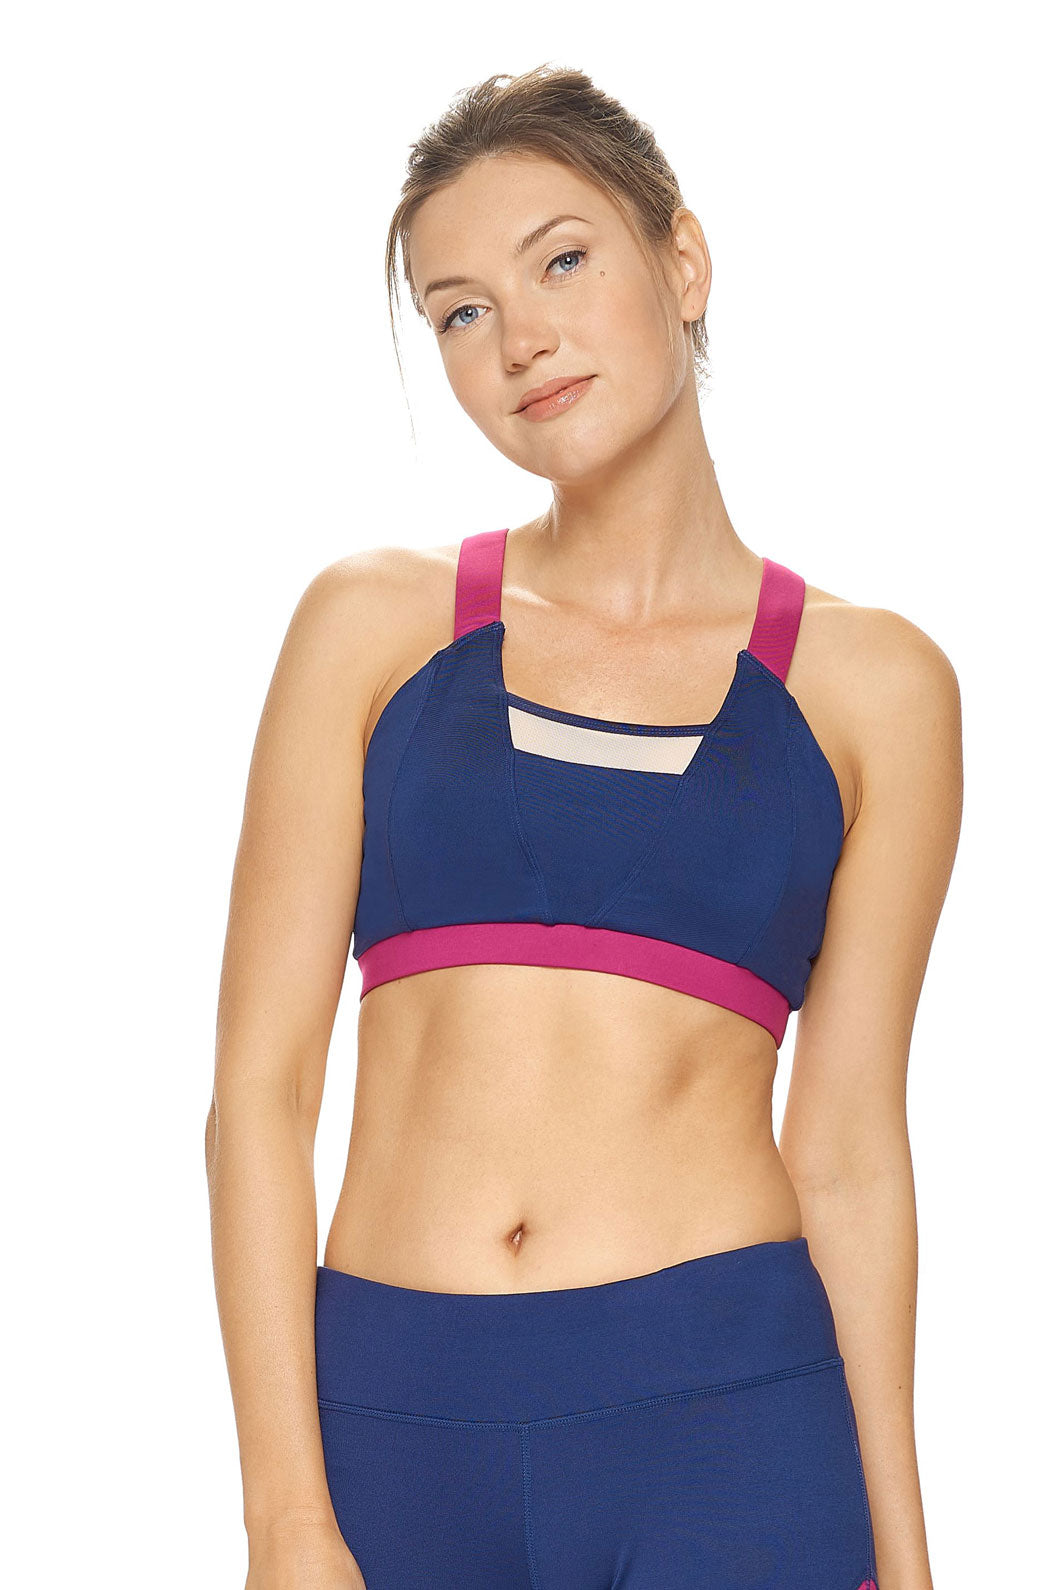 Expert Brand Wholesale Women's Airstretch Calypso Mesh Sports Bra in Navy Orchid#navy-orchid